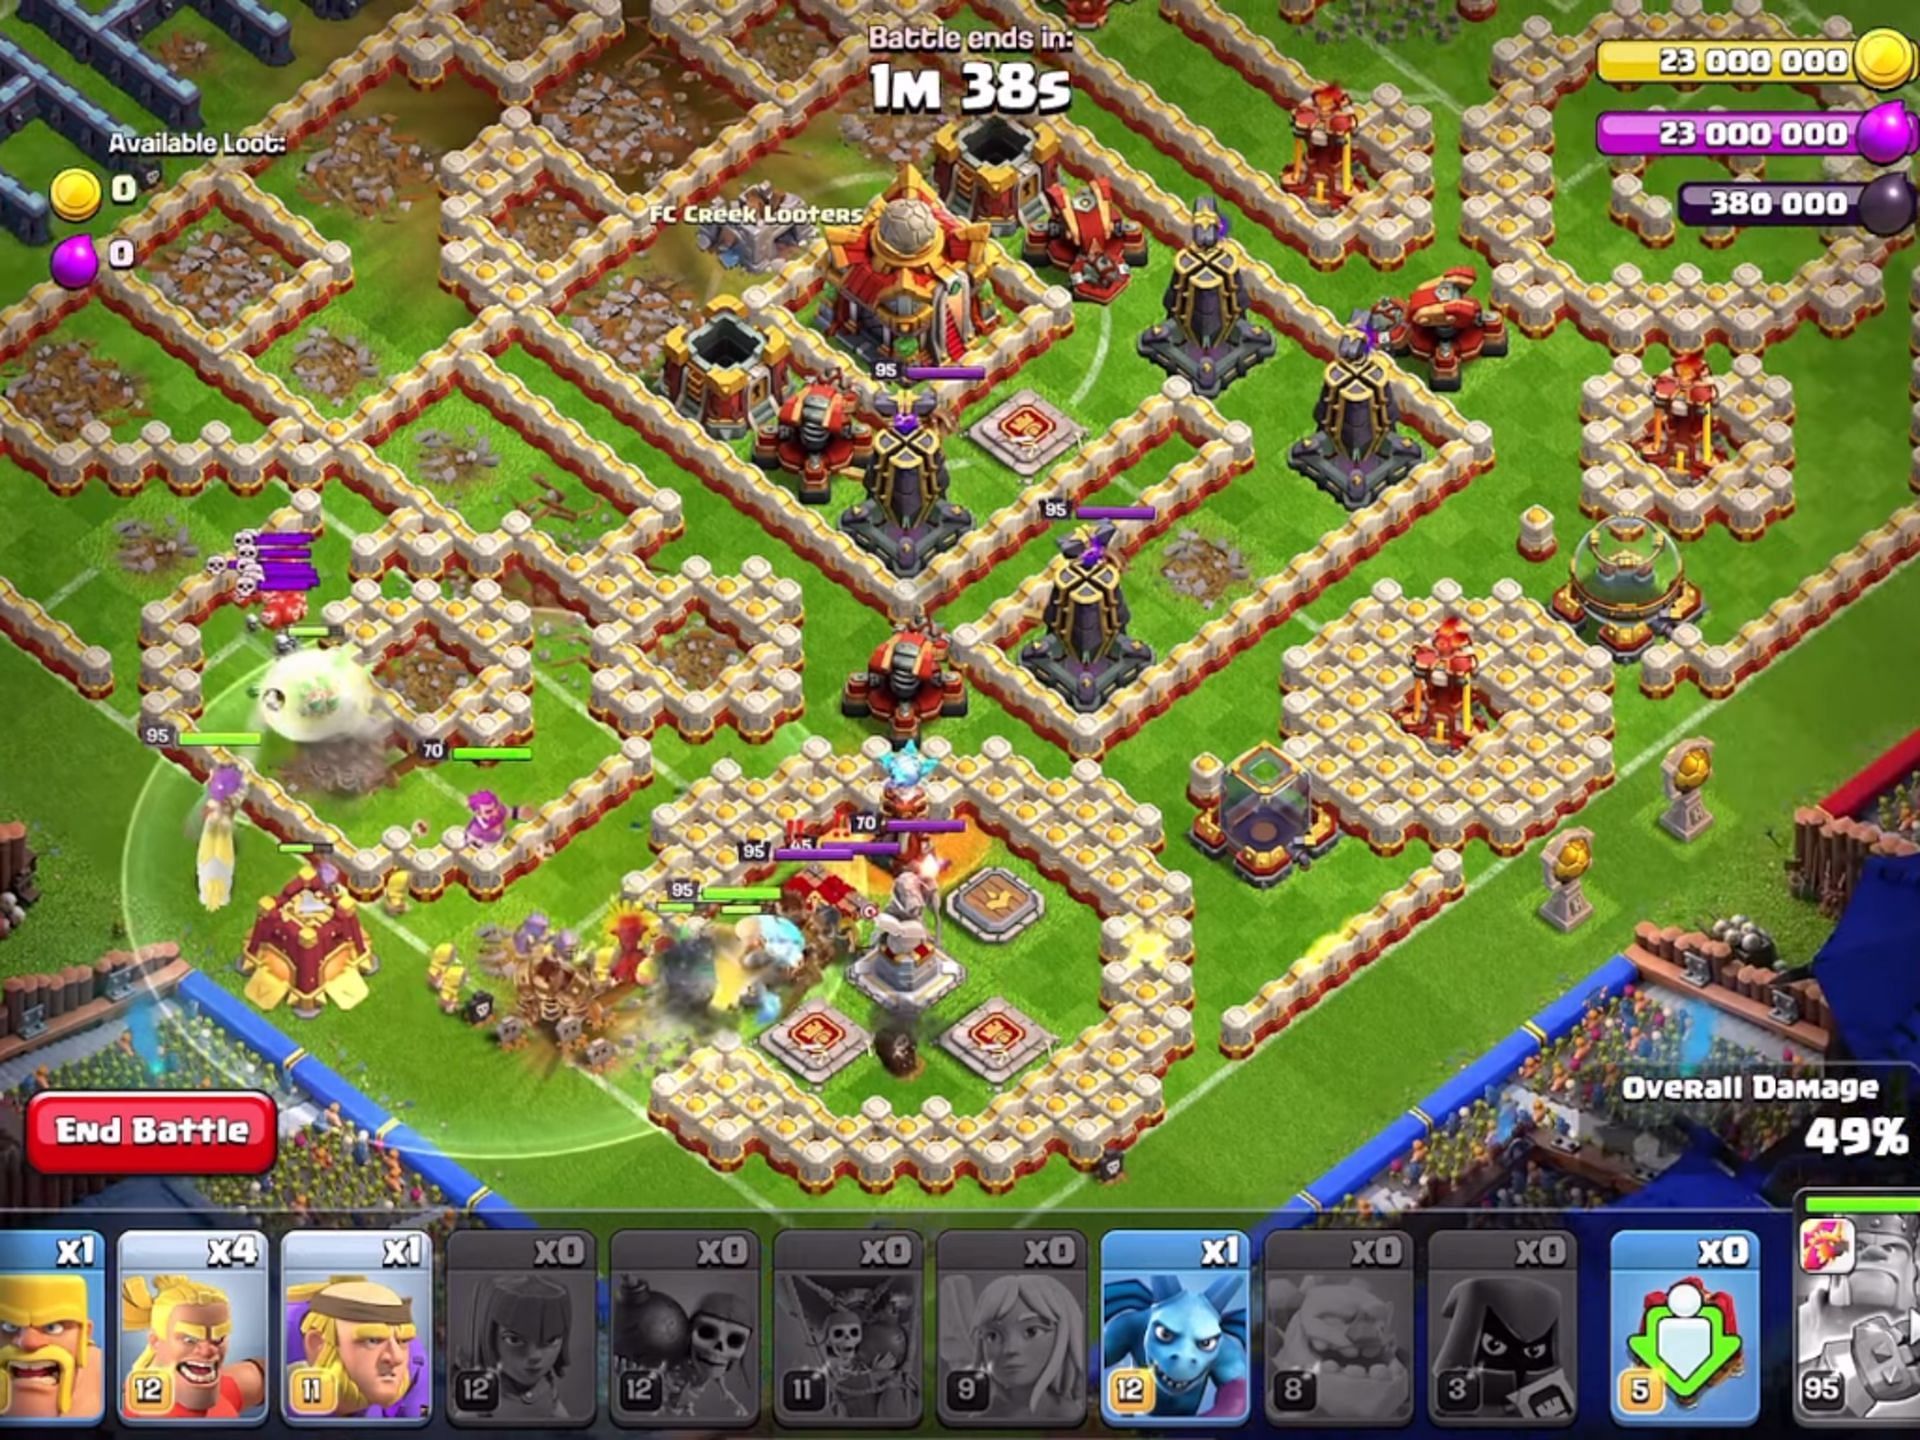 Balloons deployment in Clash of Clans Impossible Final Challenge (Image via Supercell)